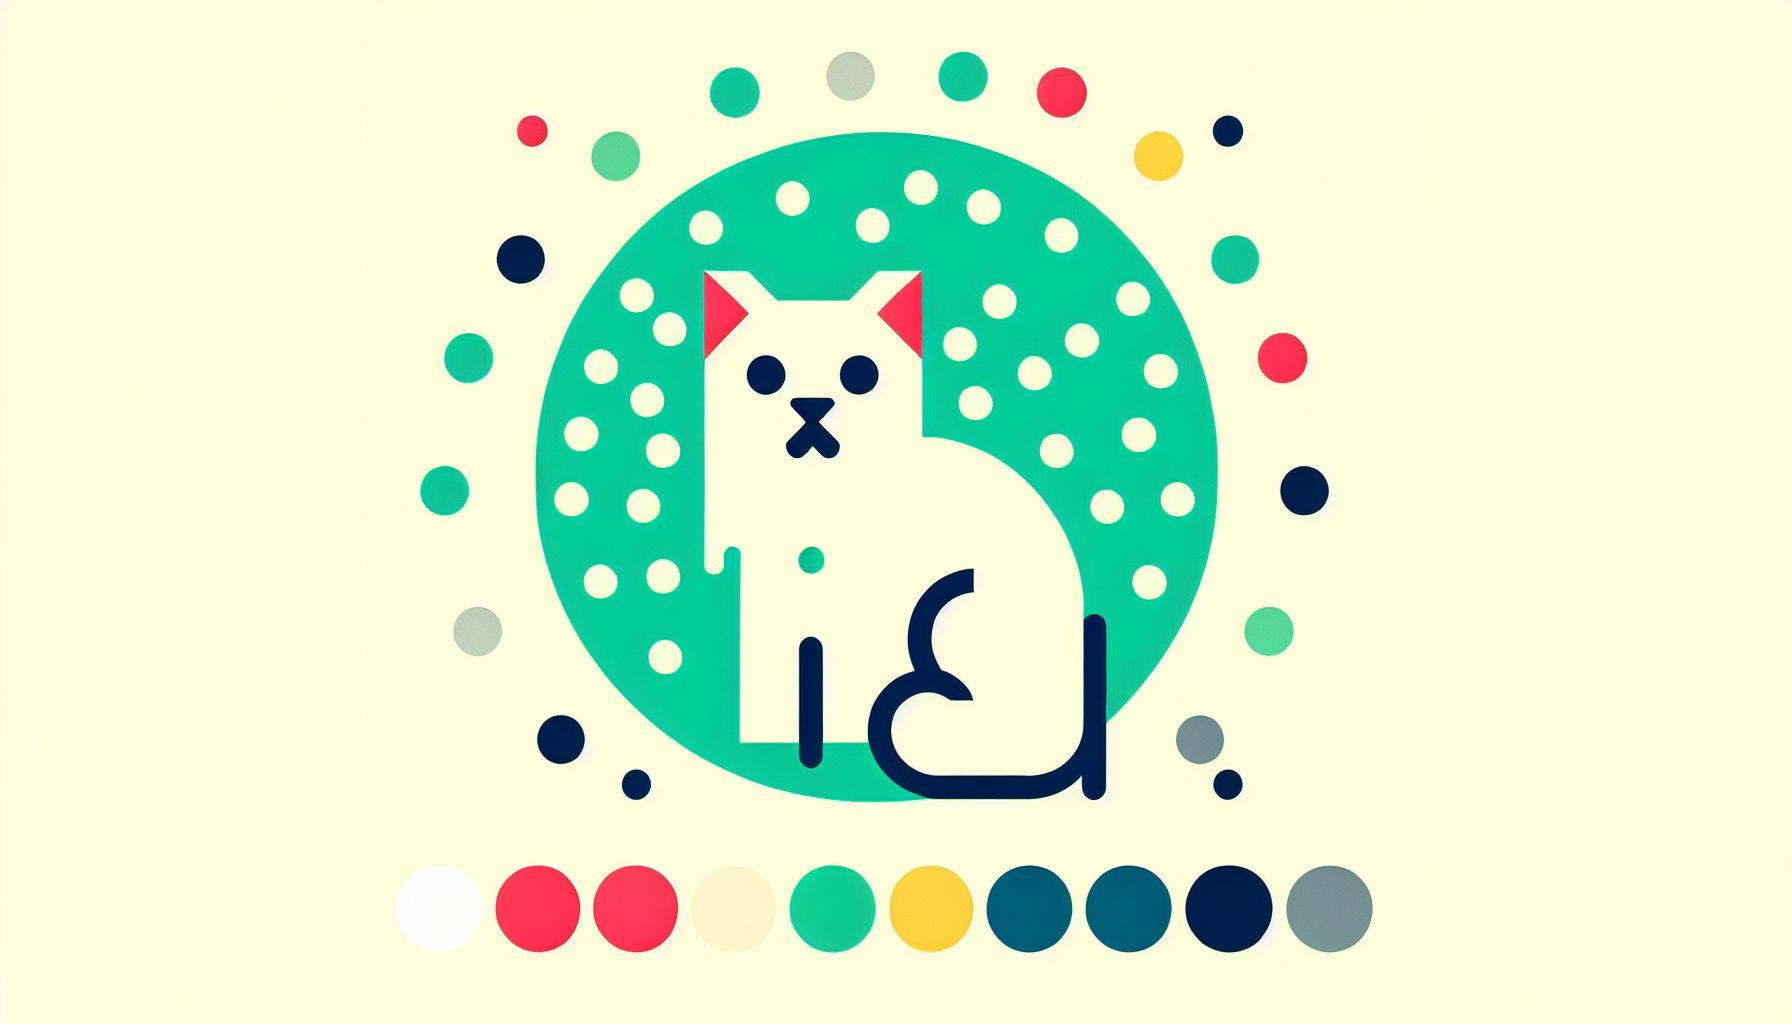 Cat in flat illustration style and white background, red #f47574, green #88c7a8, yellow #fcc44b, and blue #645bc8 colors.